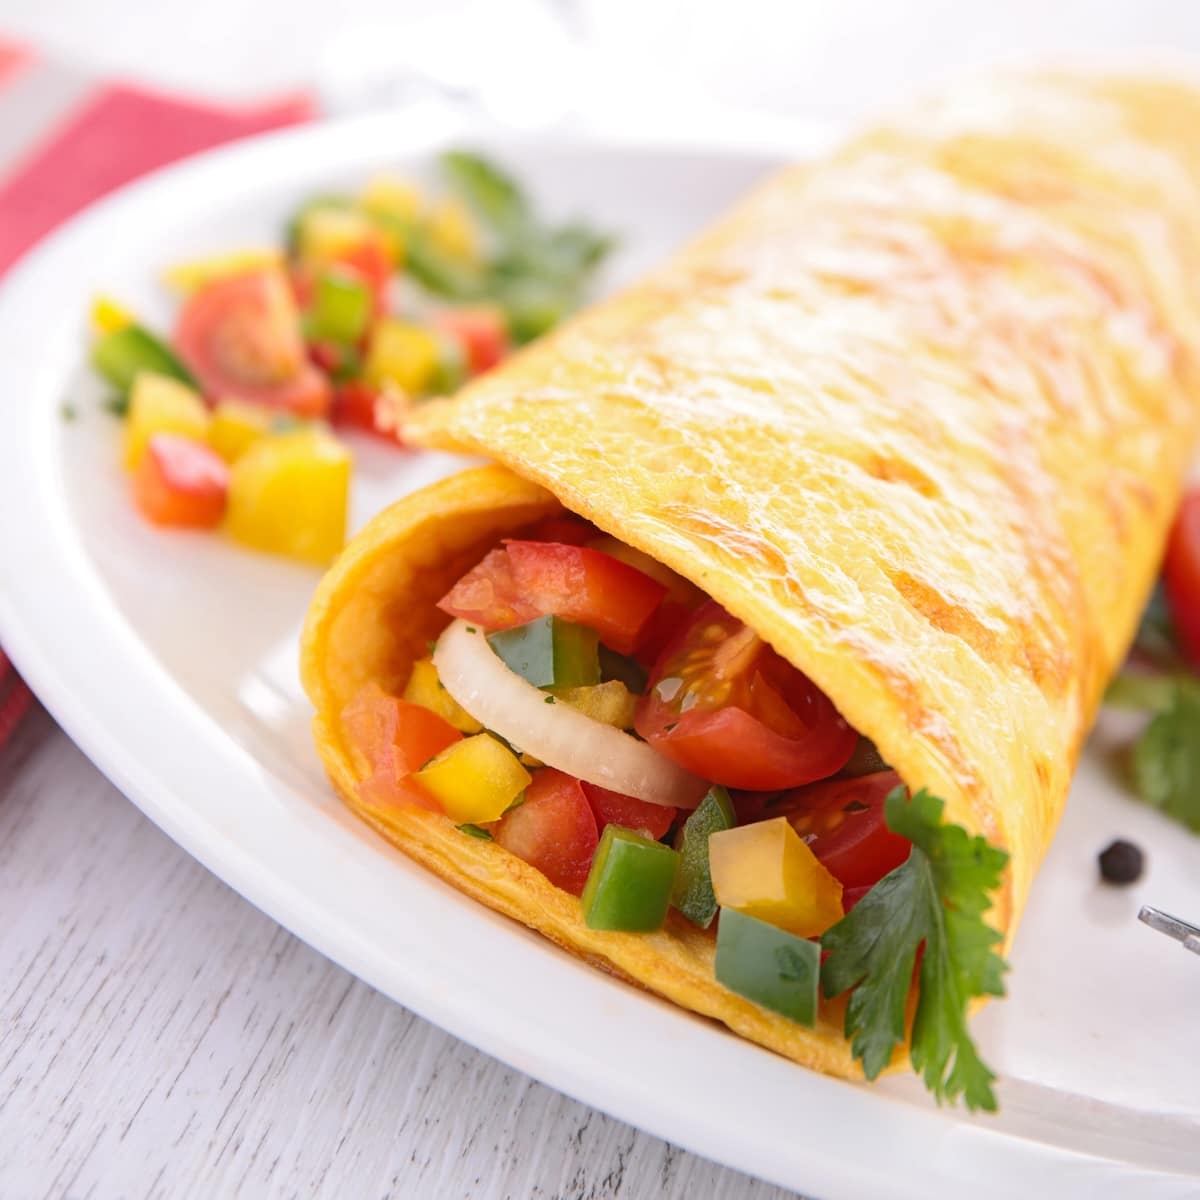 egg wrap filled with veggies.